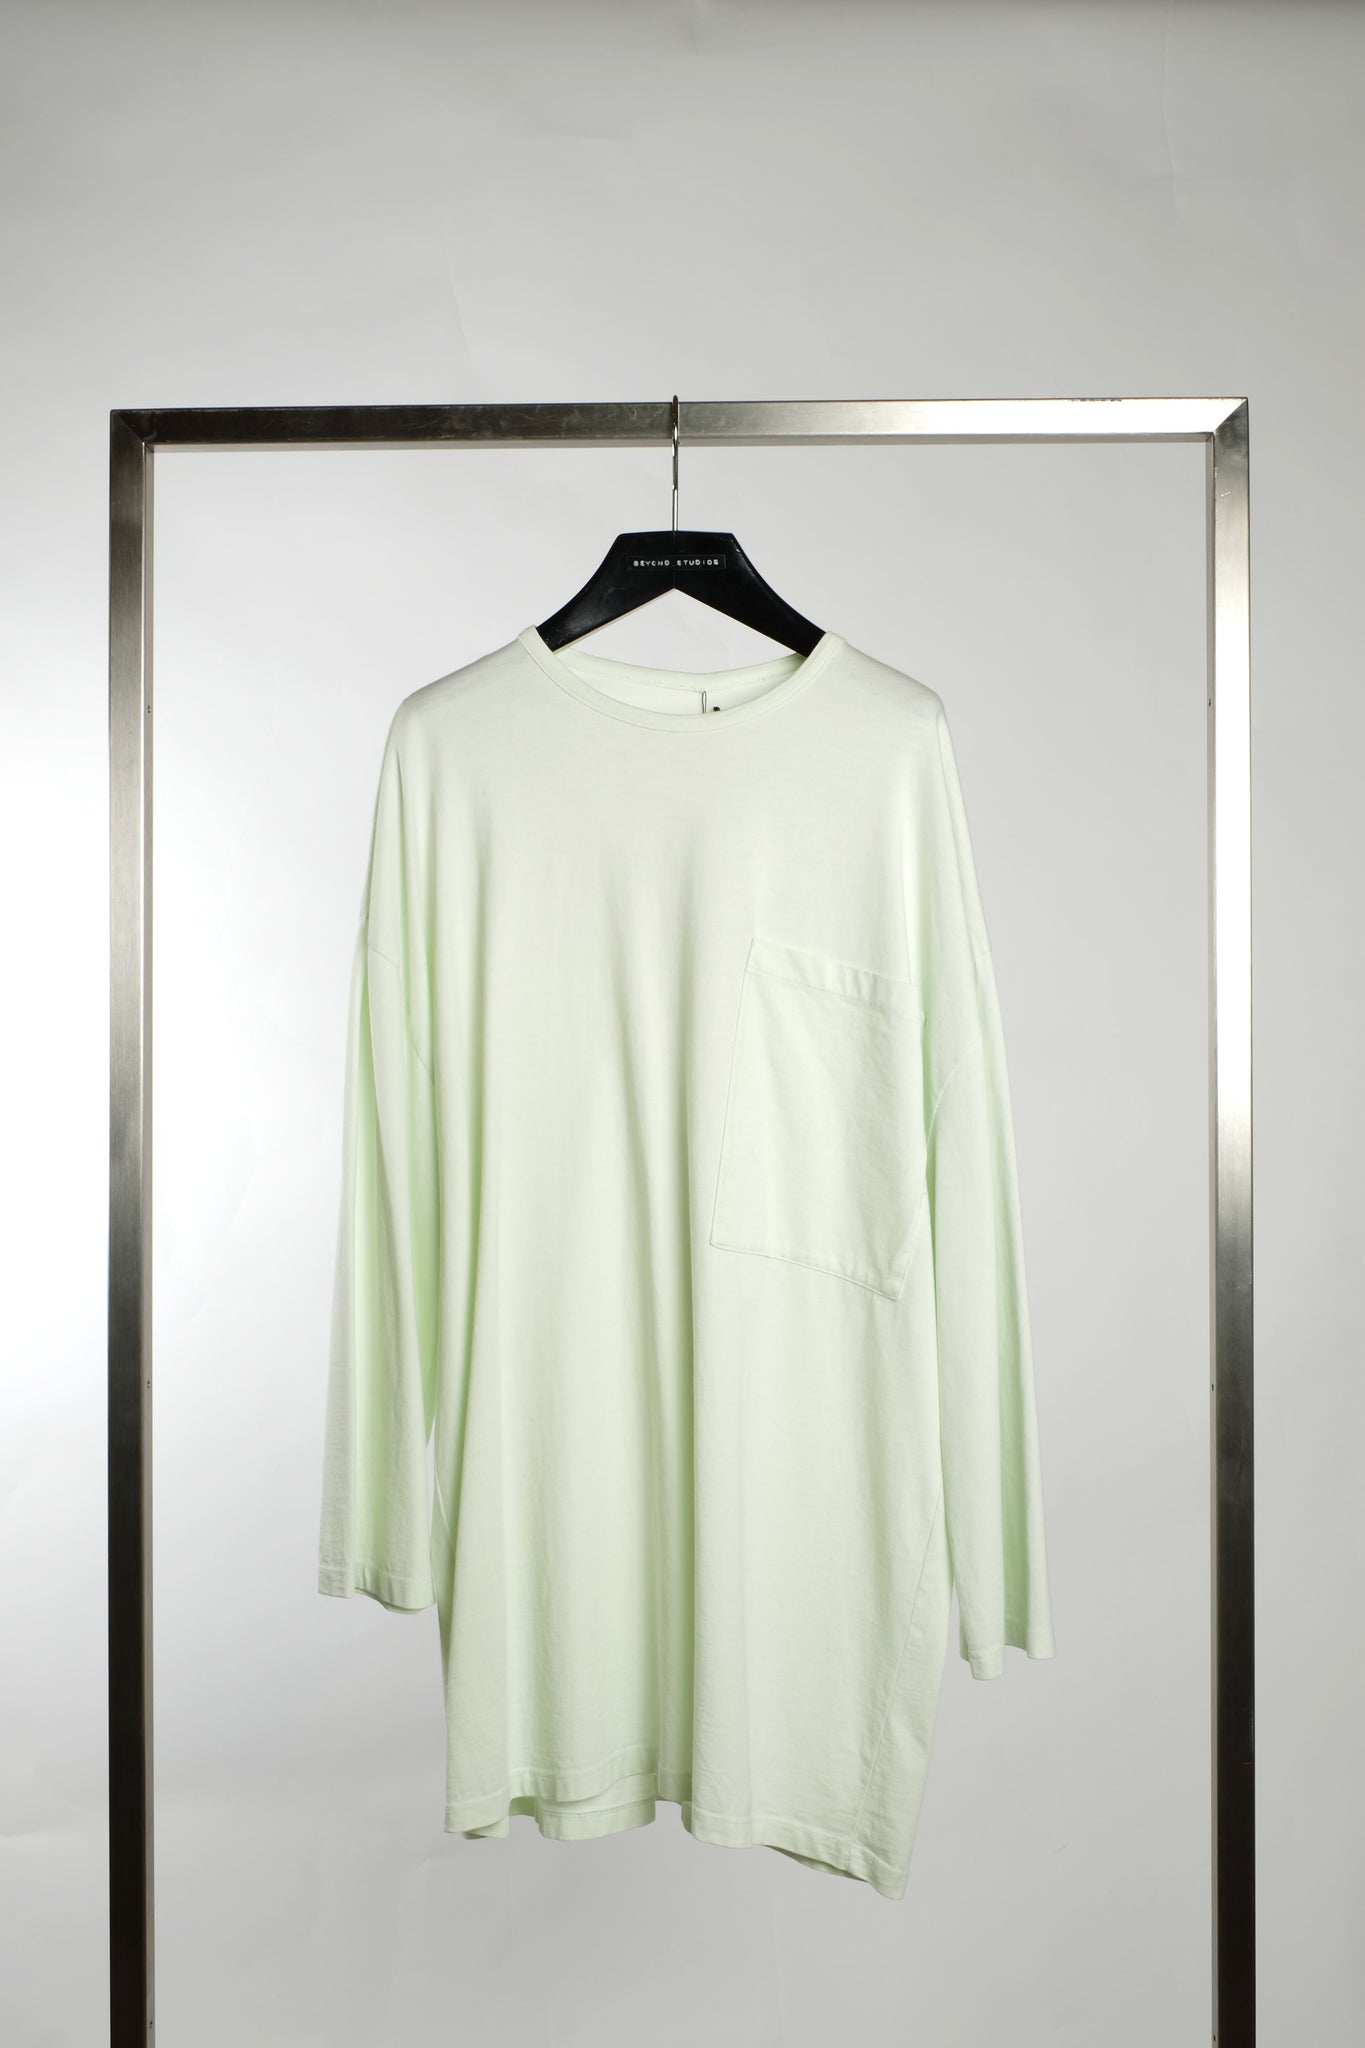 POCKET SHIRT BY CAN PEP REY IN MATCHA LATTE GREEN